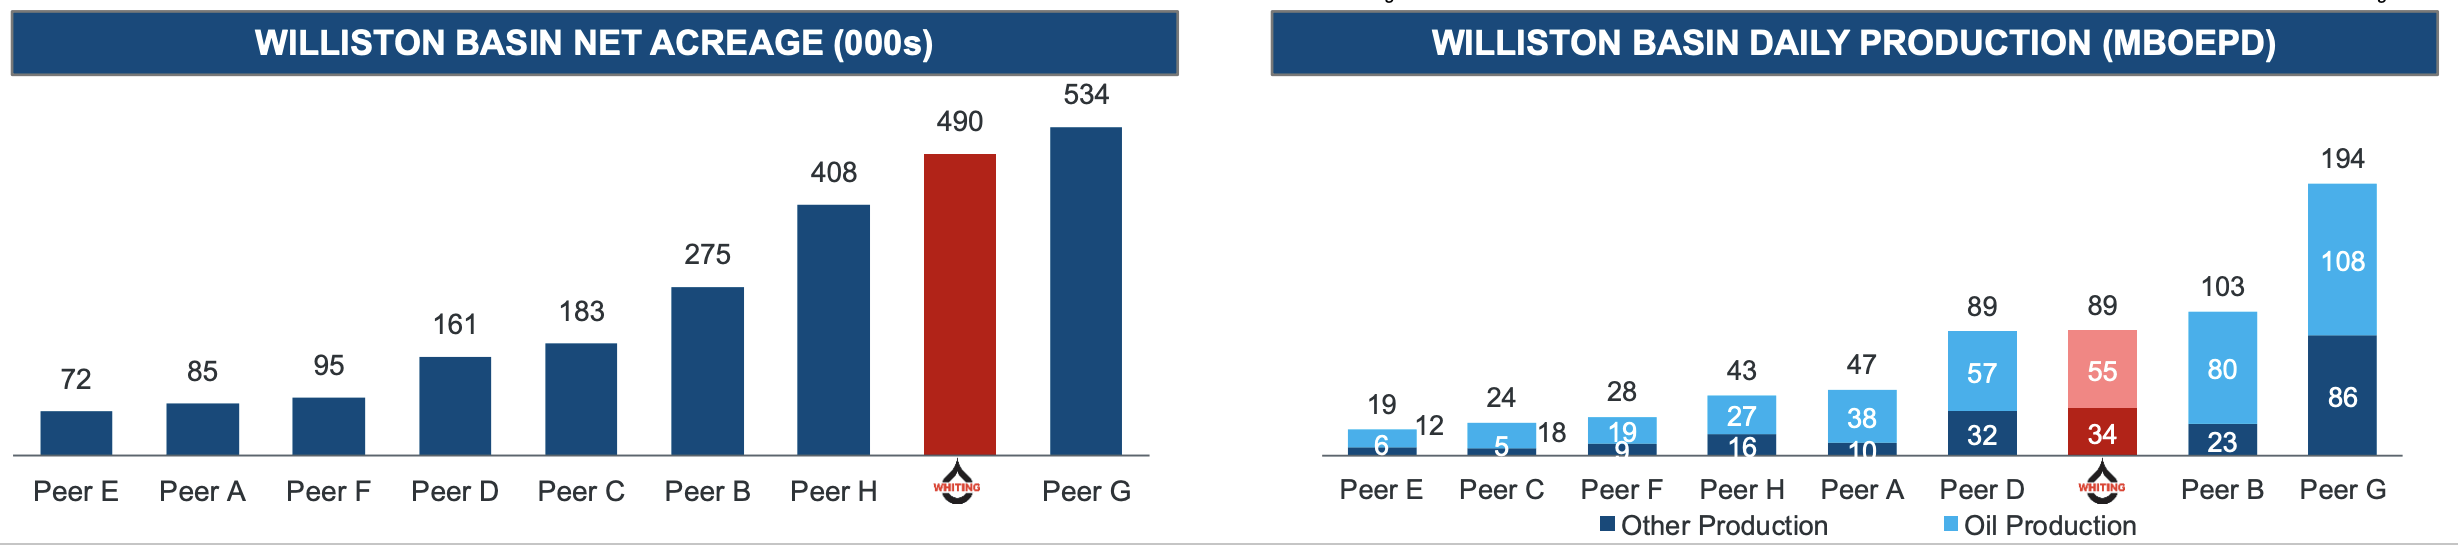 The whiting Petroleum NYSE:WLL Analysis Of Loss